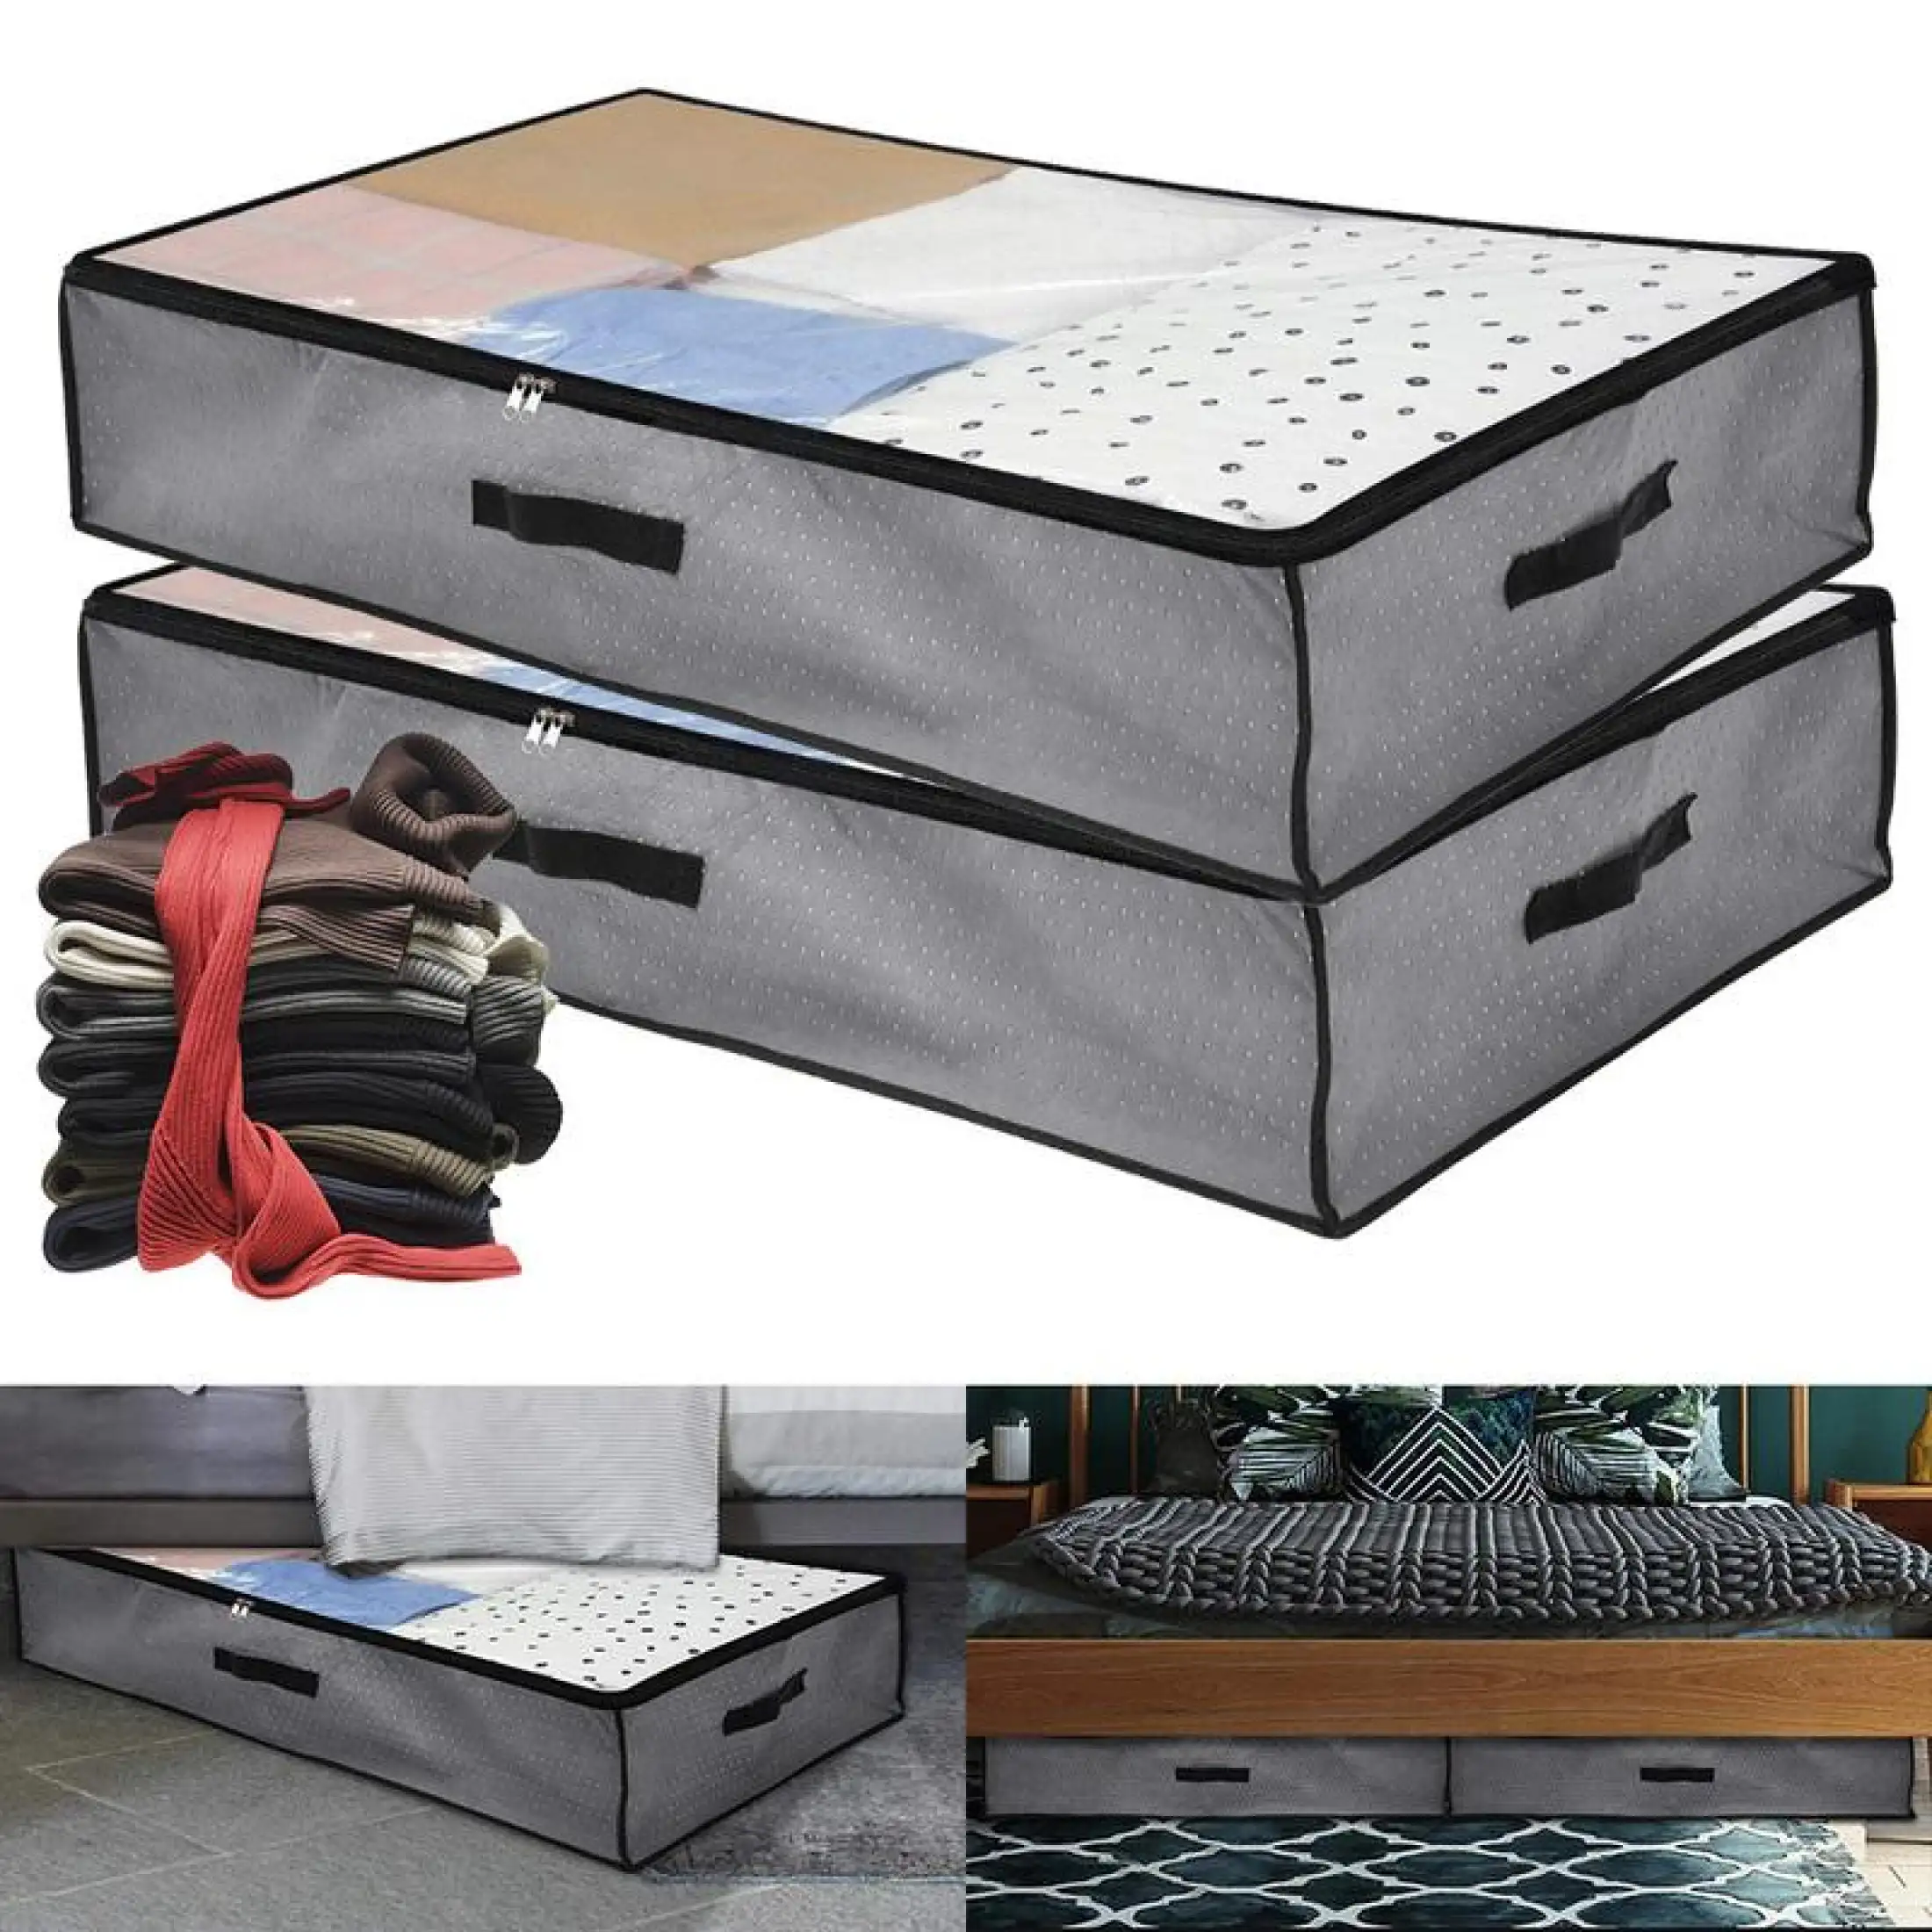 New Under Bed Storage Box Duvet Pillow Clothes Bedding Tidy Organiser Pouch Bags